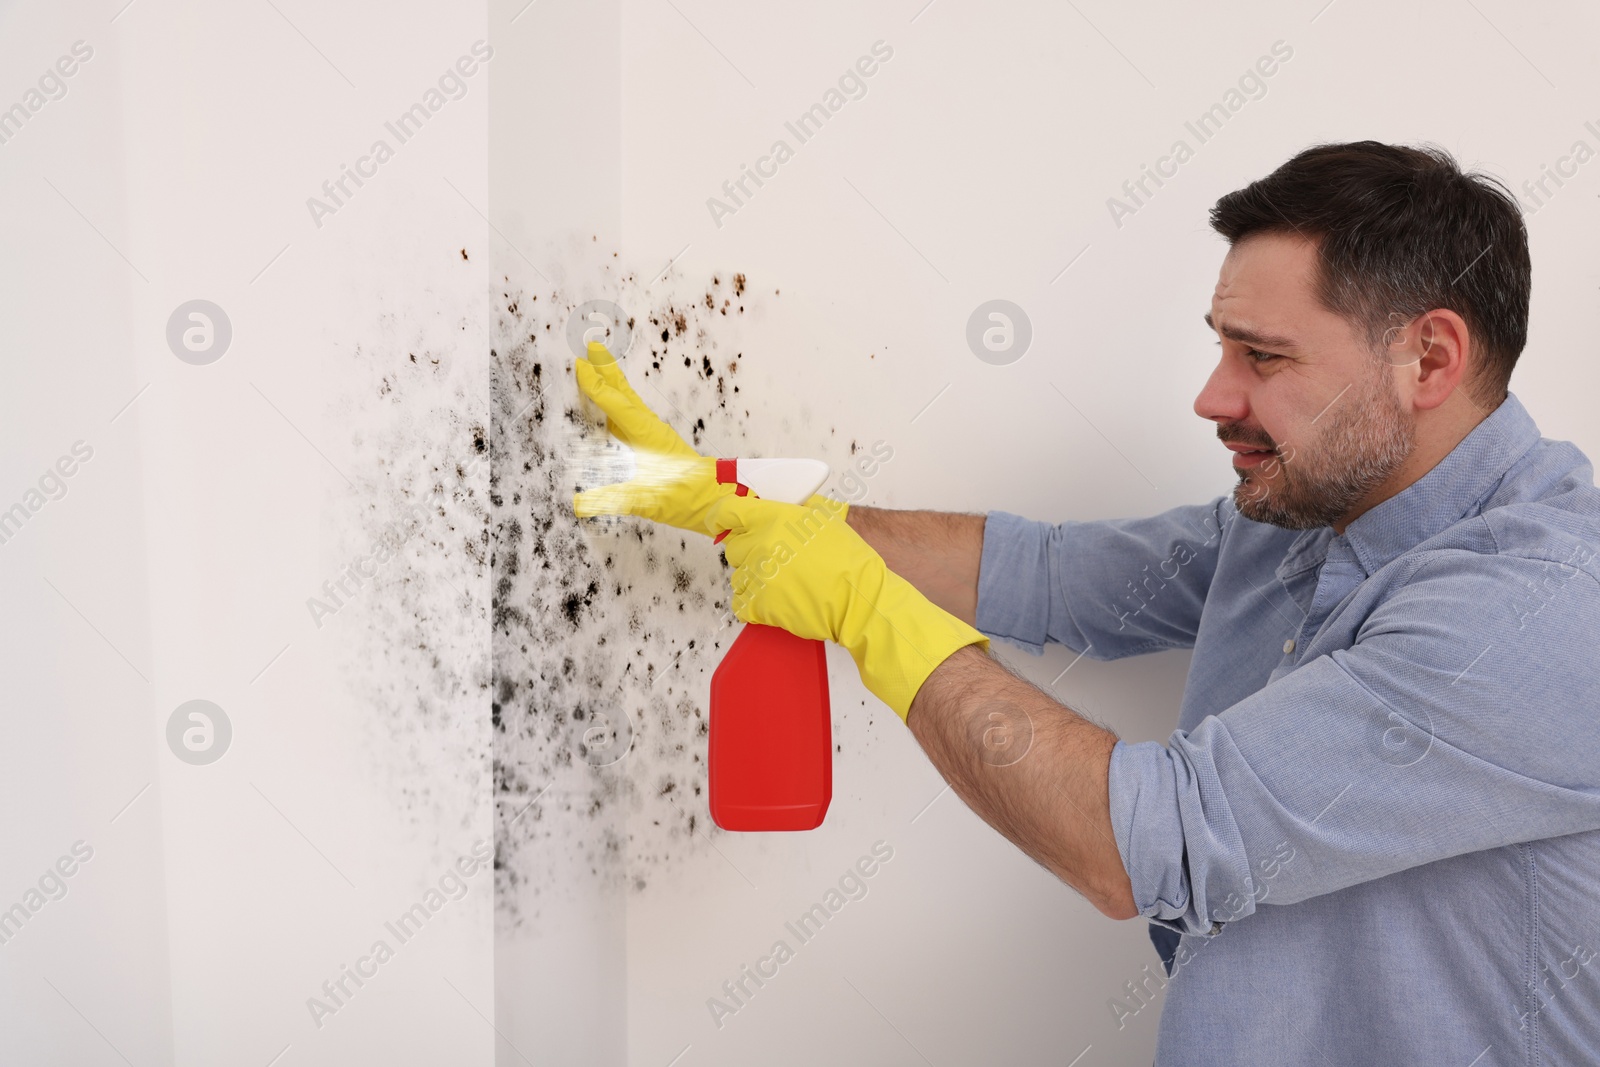 Image of Man in rubber gloves spraying mold remover onto walls in room